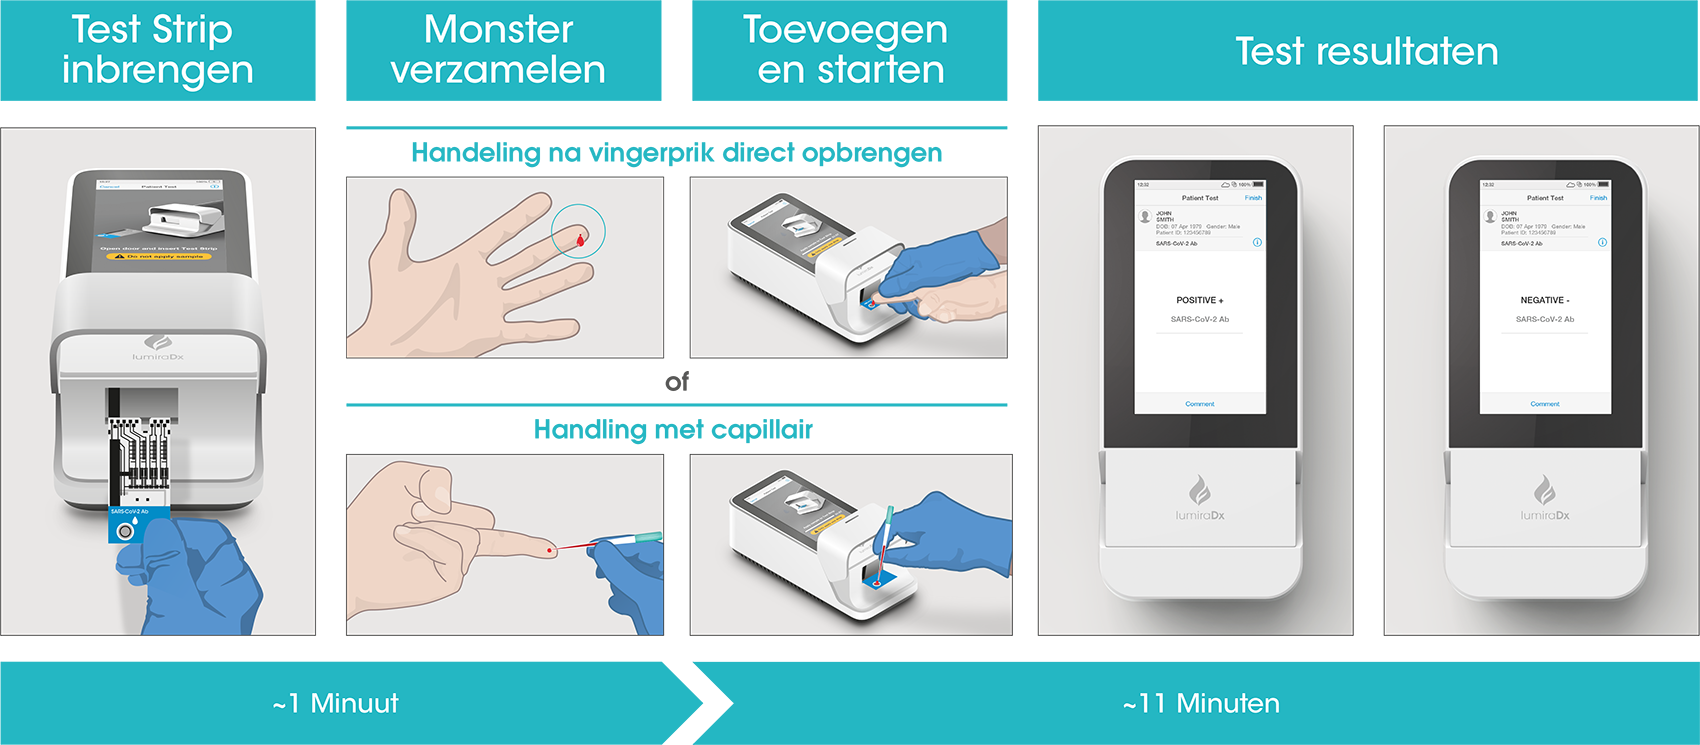 The LumiraDx SARS-CoV-2 Ab Test workflow process is comprised of a simple sample collection with a fingerstick lancet followed by step-by-step guidance of the Instrument to report a patient result in 11 minutes from sample application.